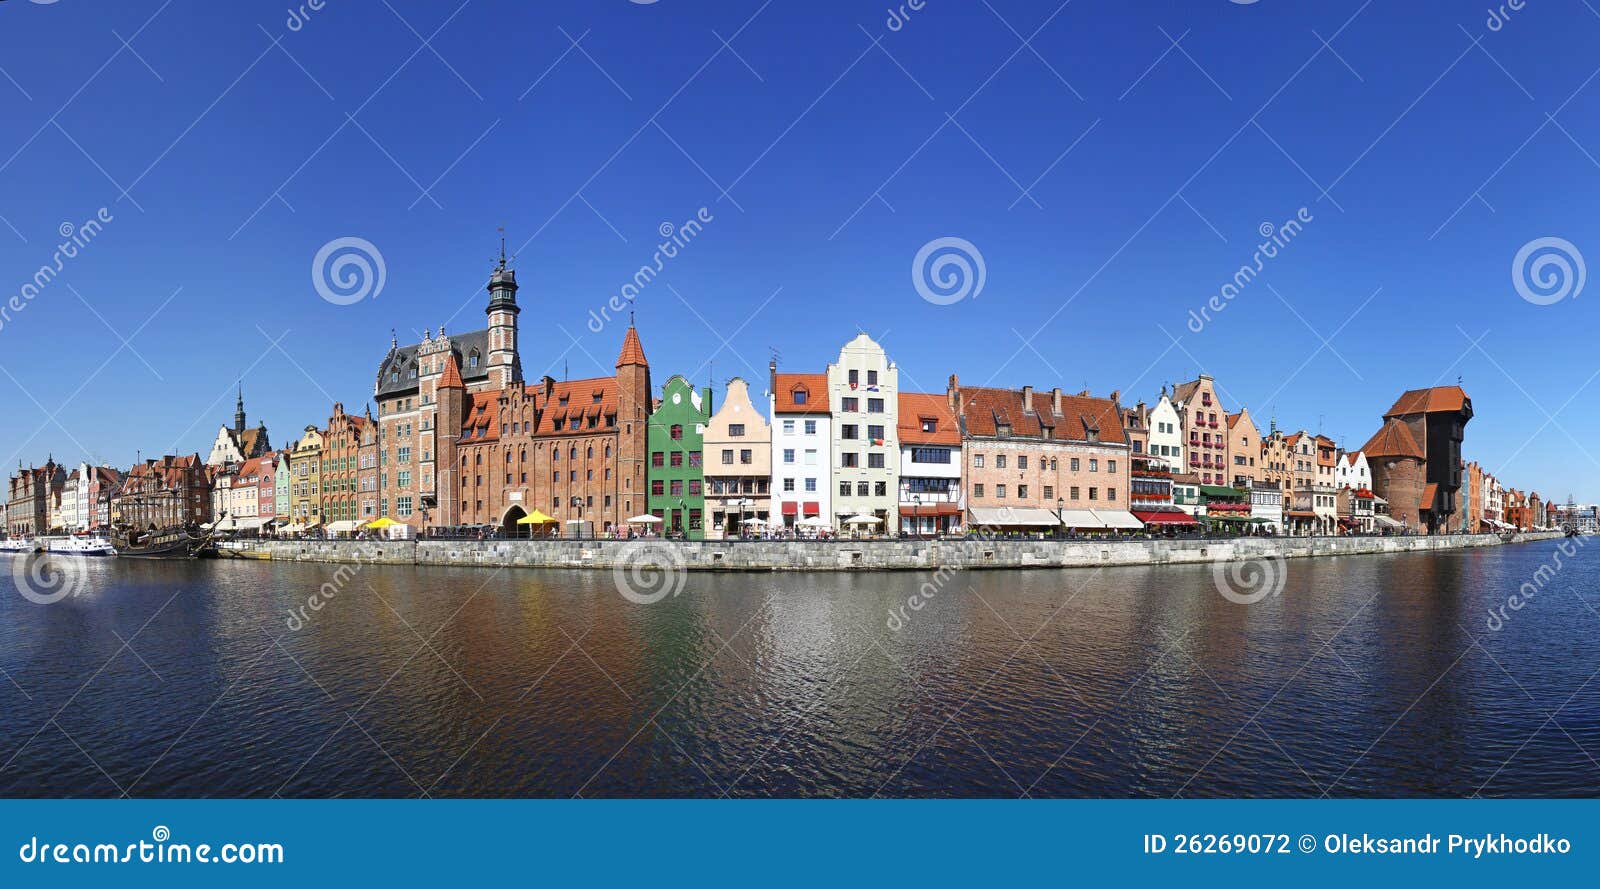 panorama of city of gdansk (danzig), poland